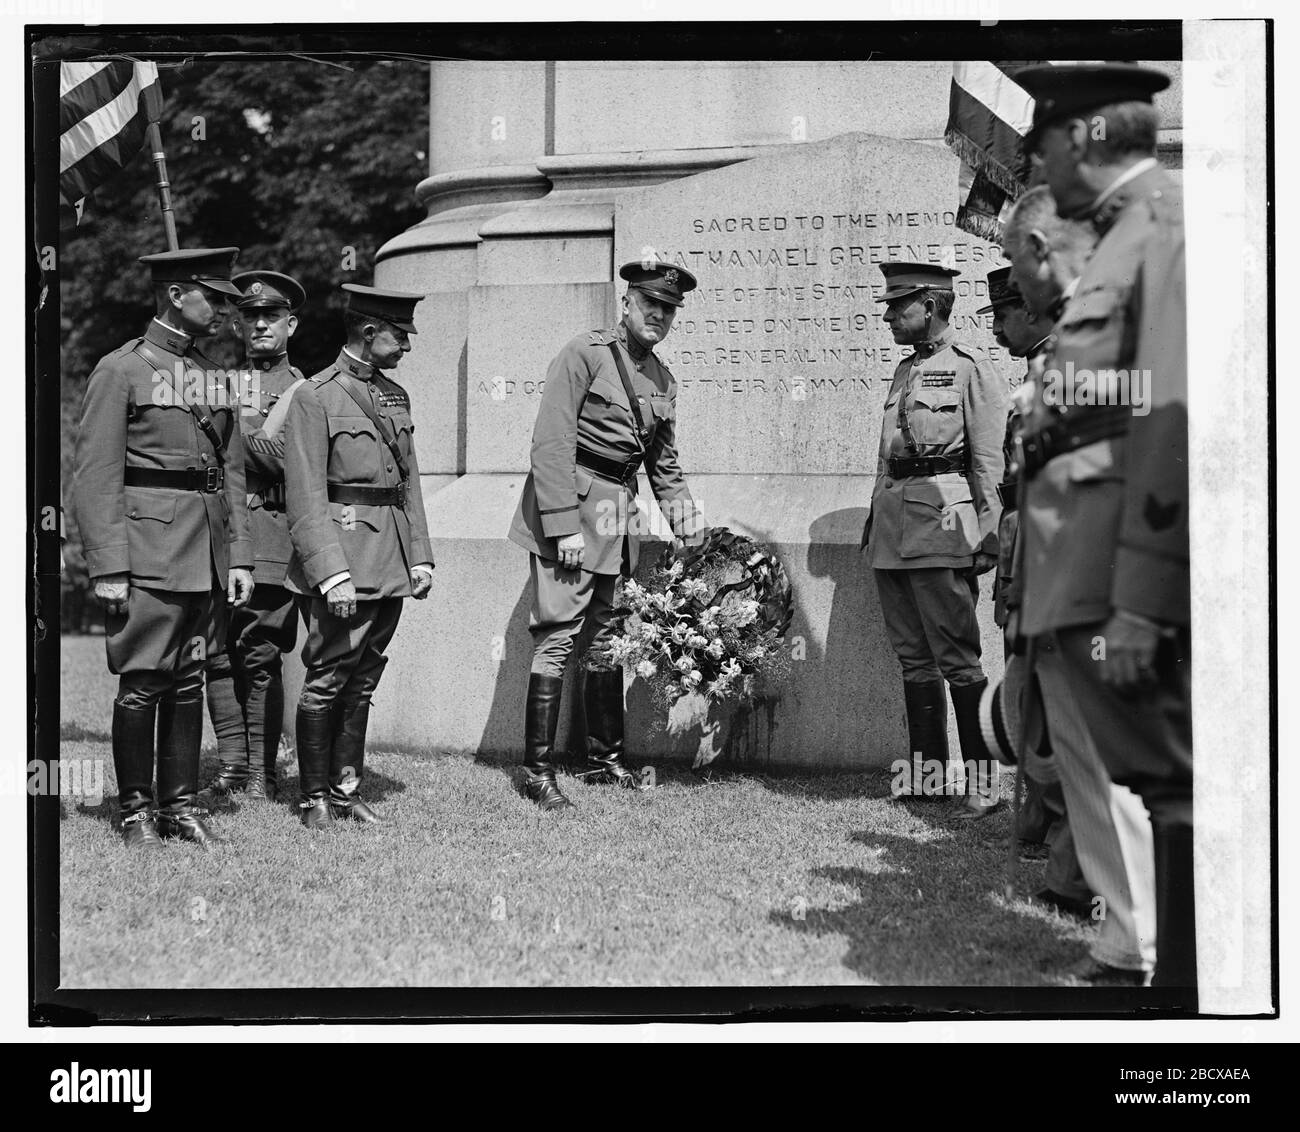 'English: Title: Anniversary ceremonies at statue of Nathaniel Greene, [8/7/24] Abstract/medium: National Photo Company Collection (Library of Congress)  Physical description: 1 negative :; 1924; Library of Congress Catalog: https://www.loc.gov/pictures/item/2016838193 Original url: https://hdl.loc.gov/loc.pnp/npcc.11924; National Photo Company Collection; ' Stock Photo